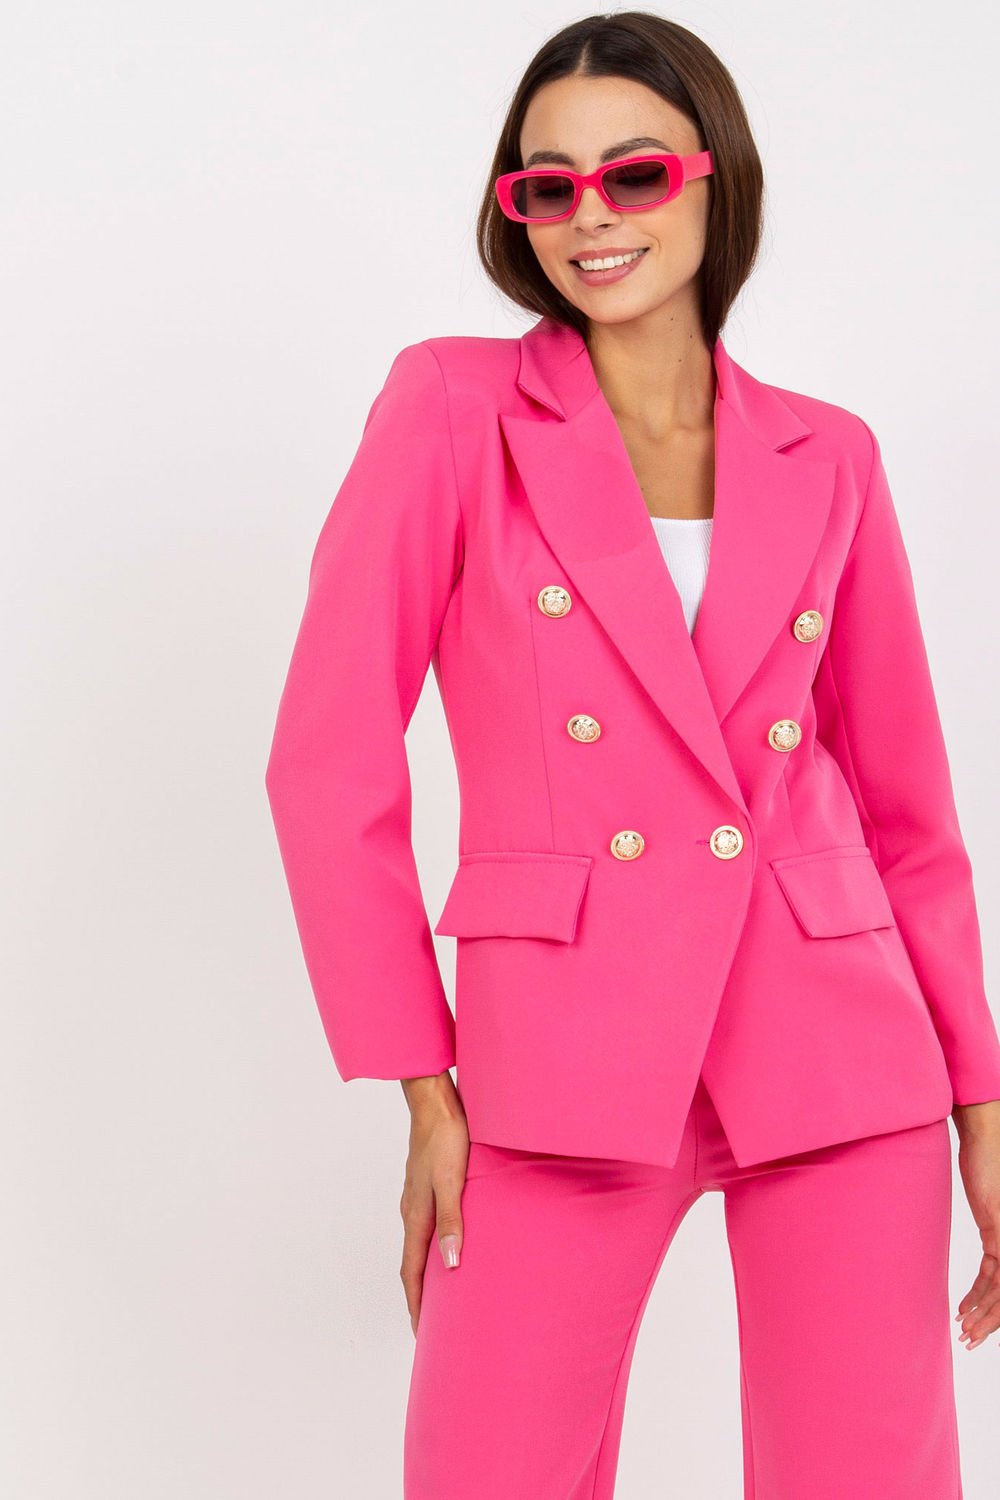 Hot Pink Double Breasted Suit Blazer